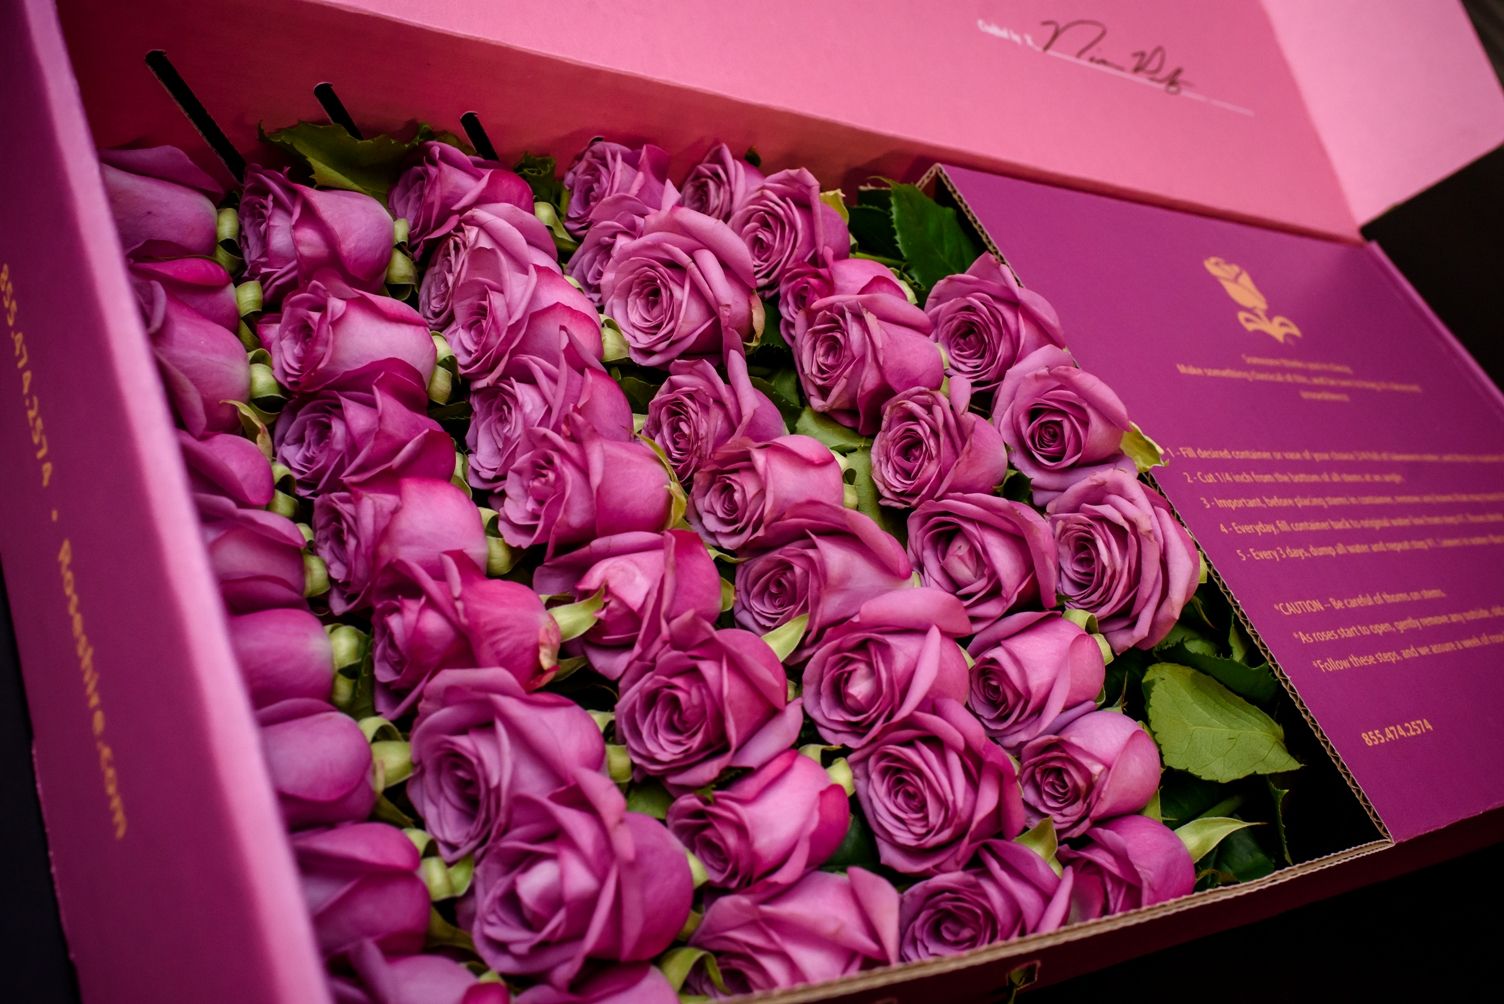 Are Roseshire Roses a Thing? This Luxe Flower Delivery Service